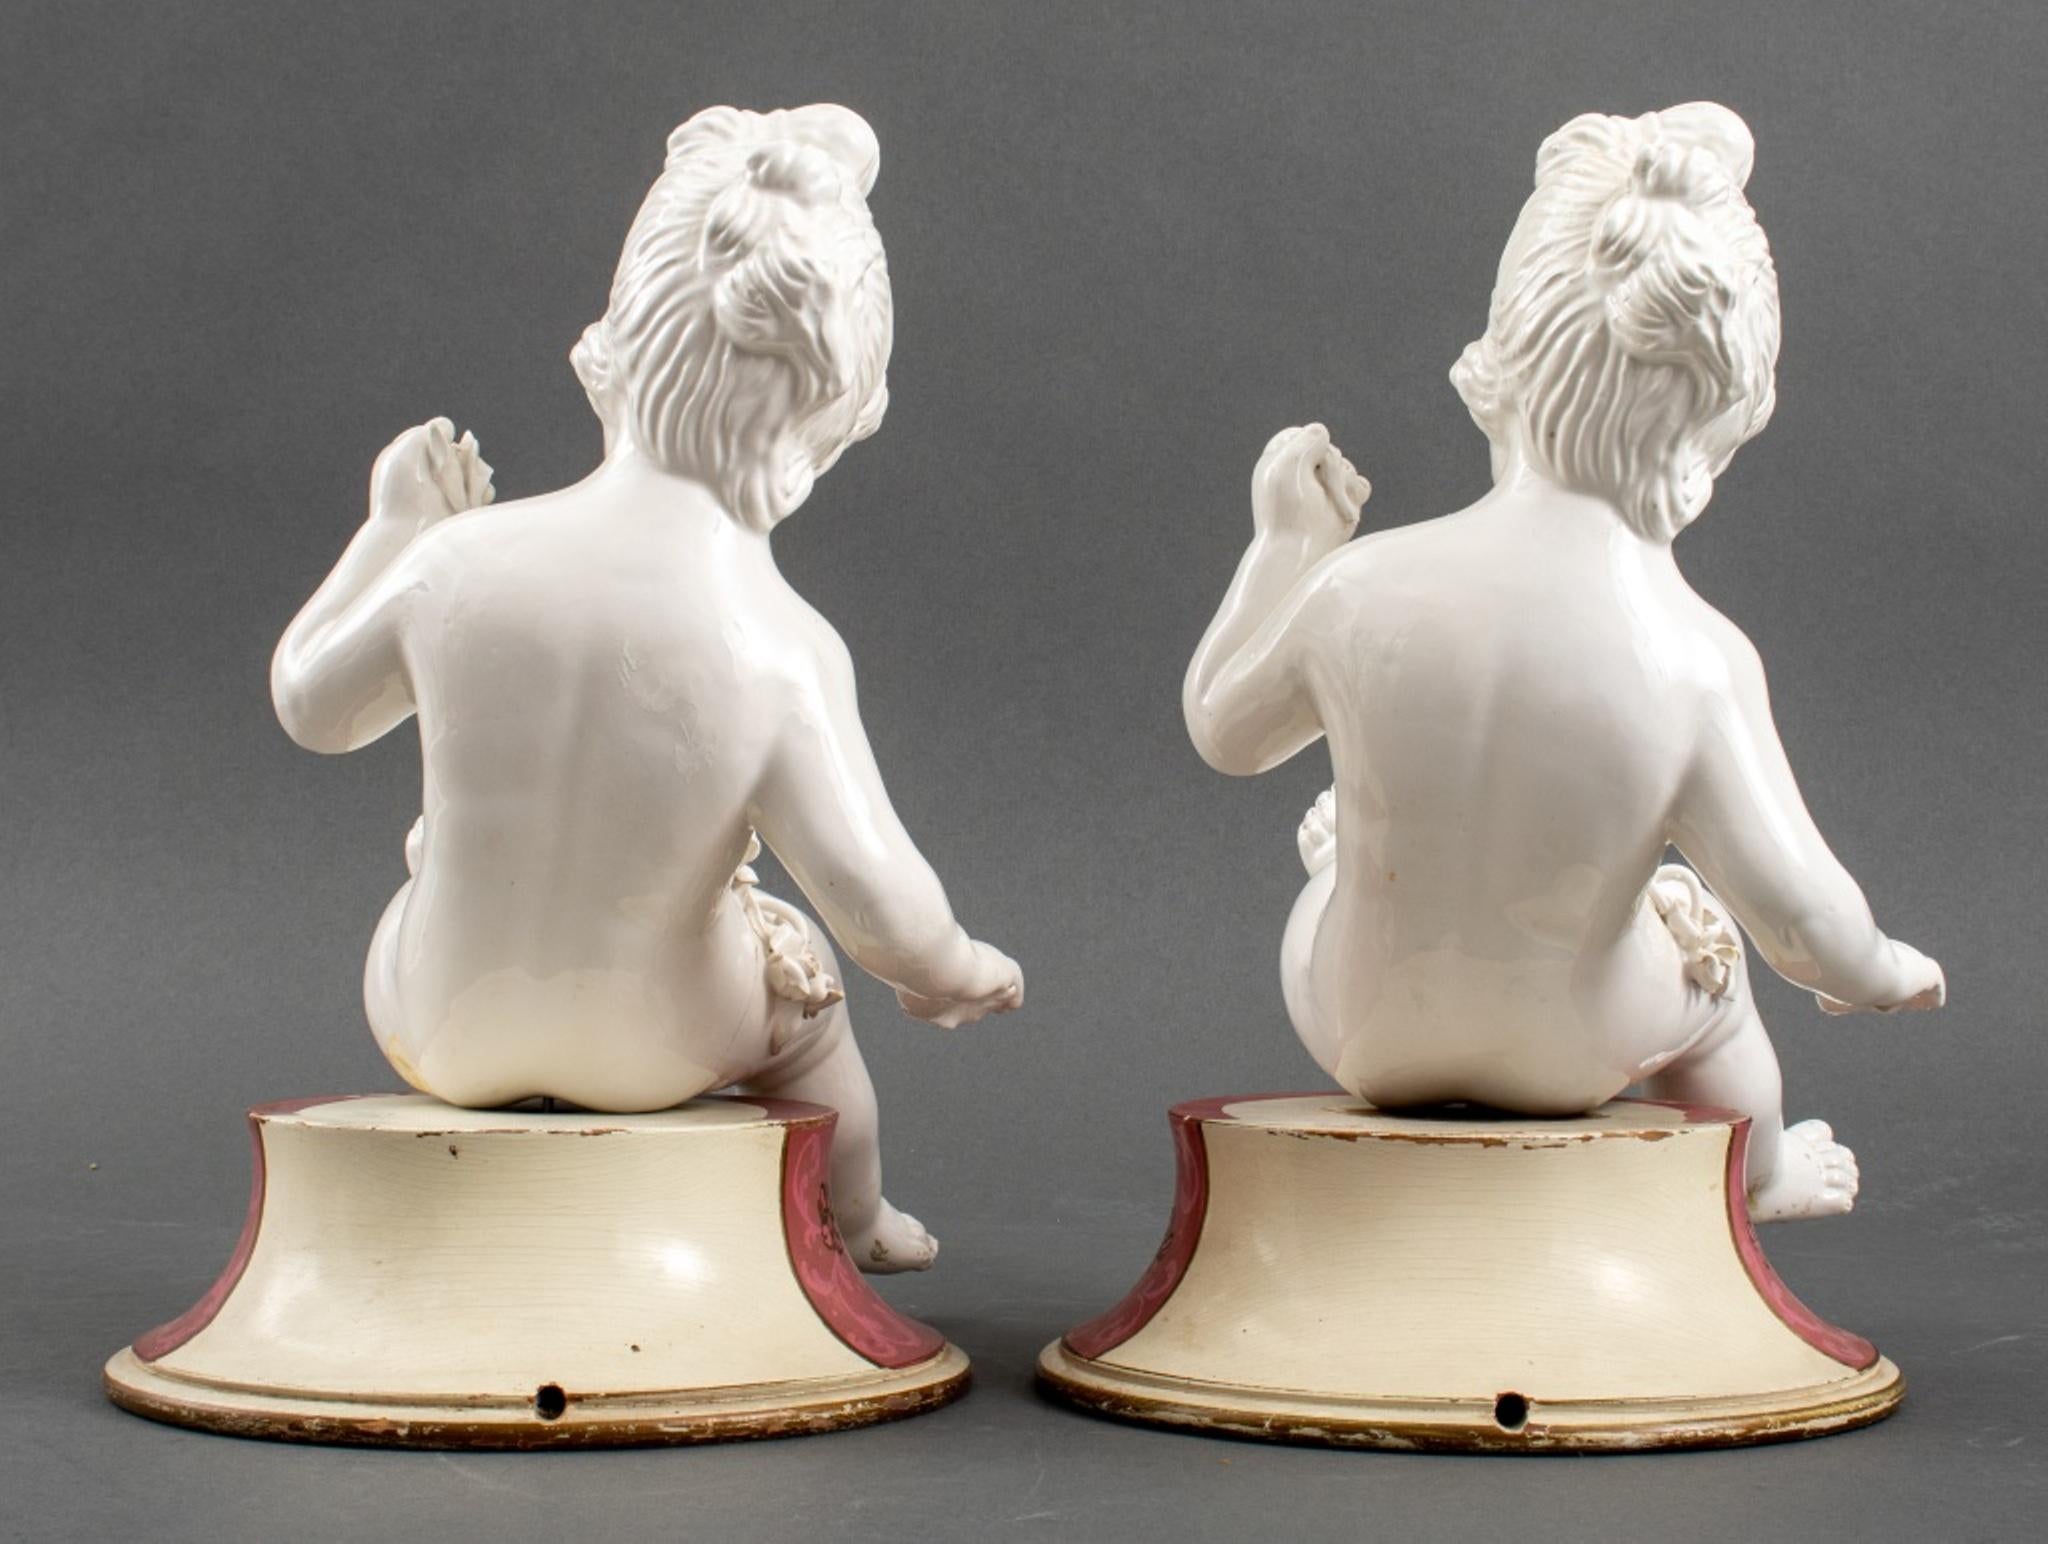 Pair of White Porcelain Cherub Putti Sculptures In Good Condition For Sale In New York, NY